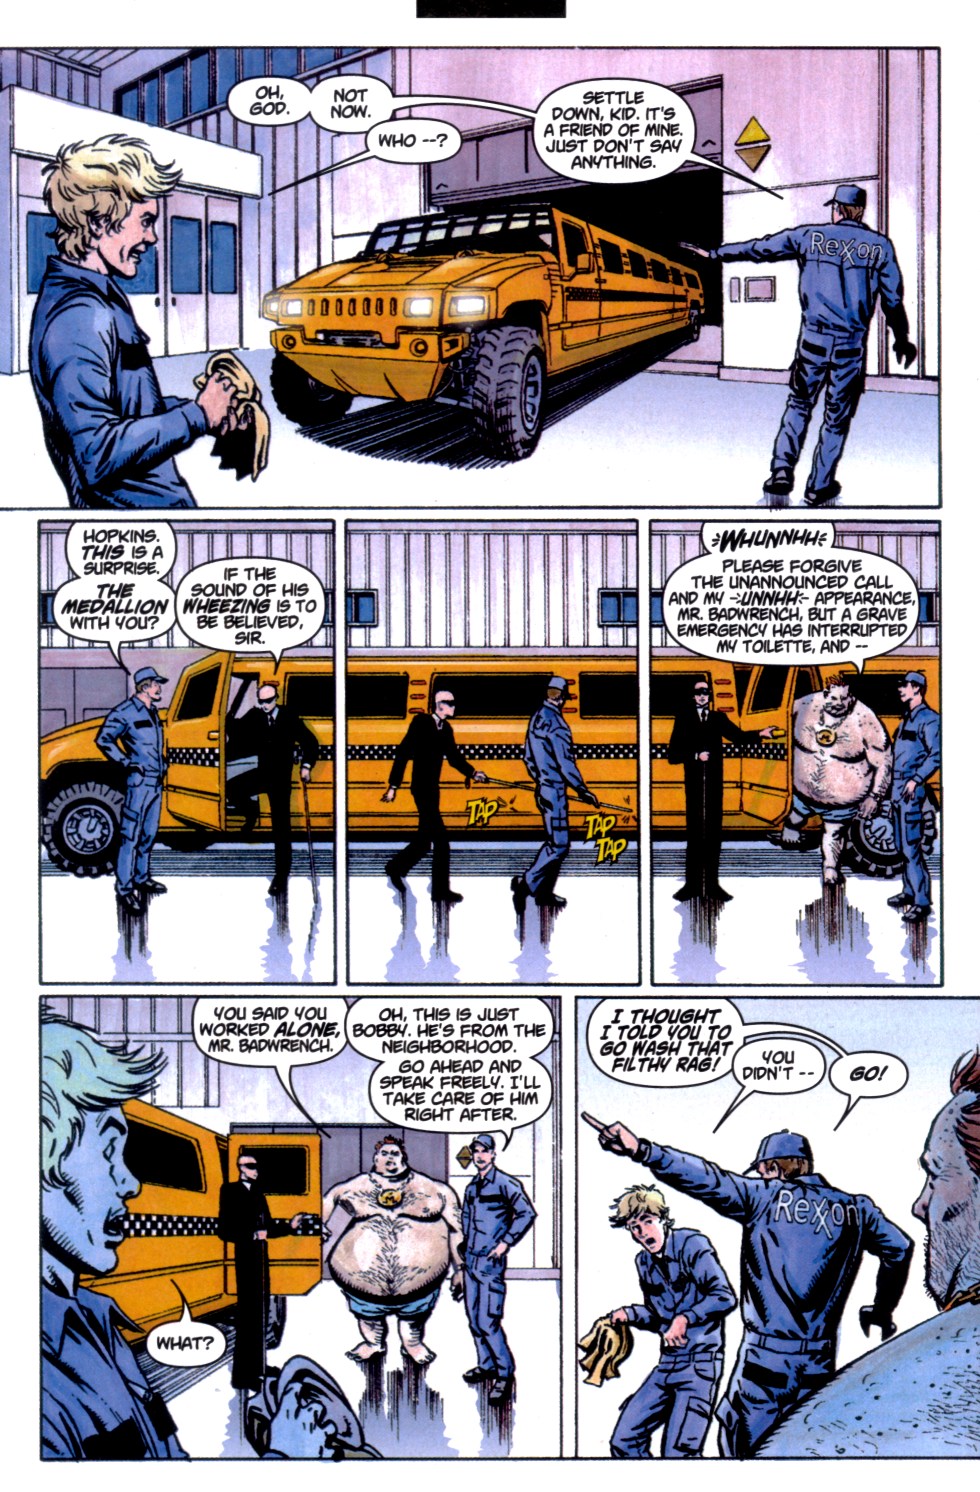 The Punisher (2001) Issue #10 - Taxi Wars #02 - This Makes it Personal! #10 - English 16